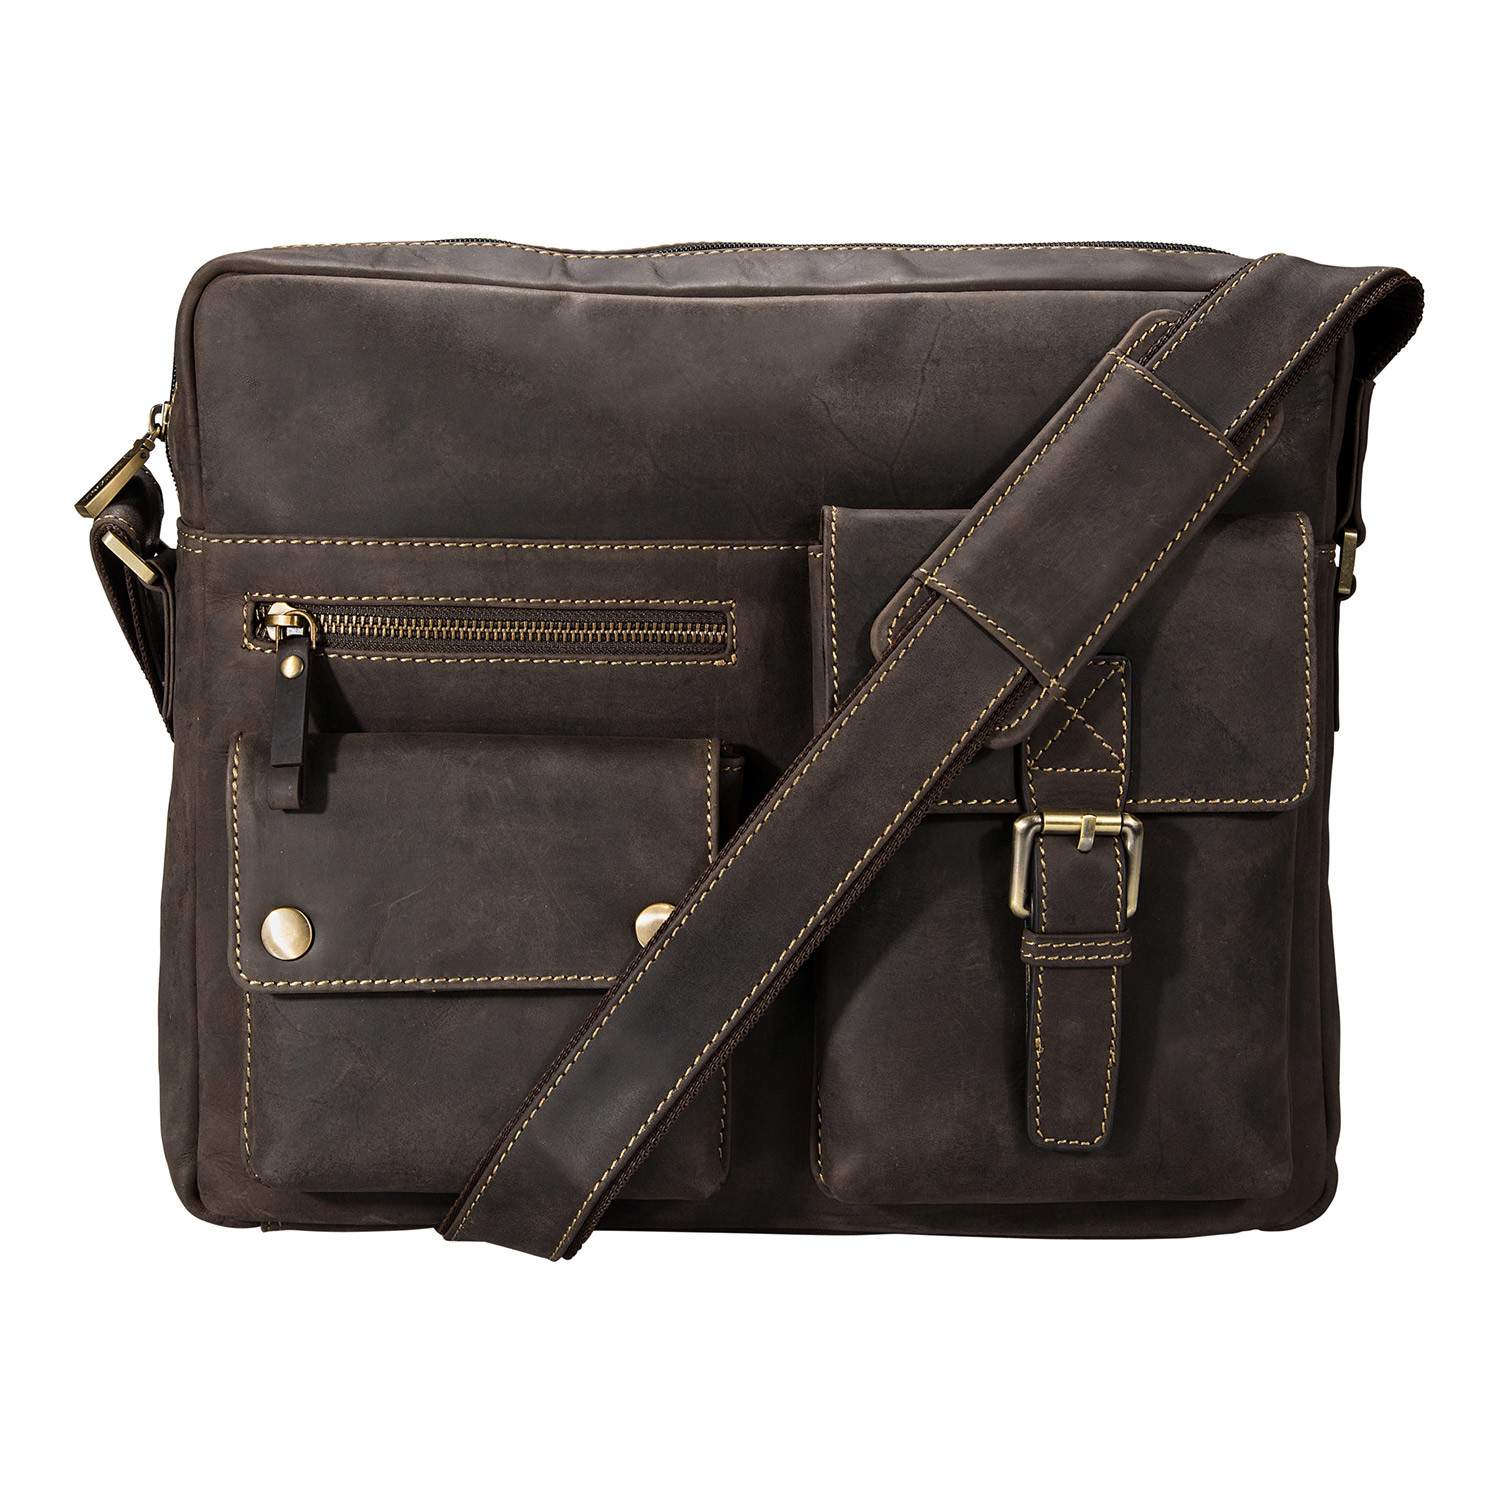 Distressed Leather Messenger Bag // Brown - Visconti - Touch of Modern